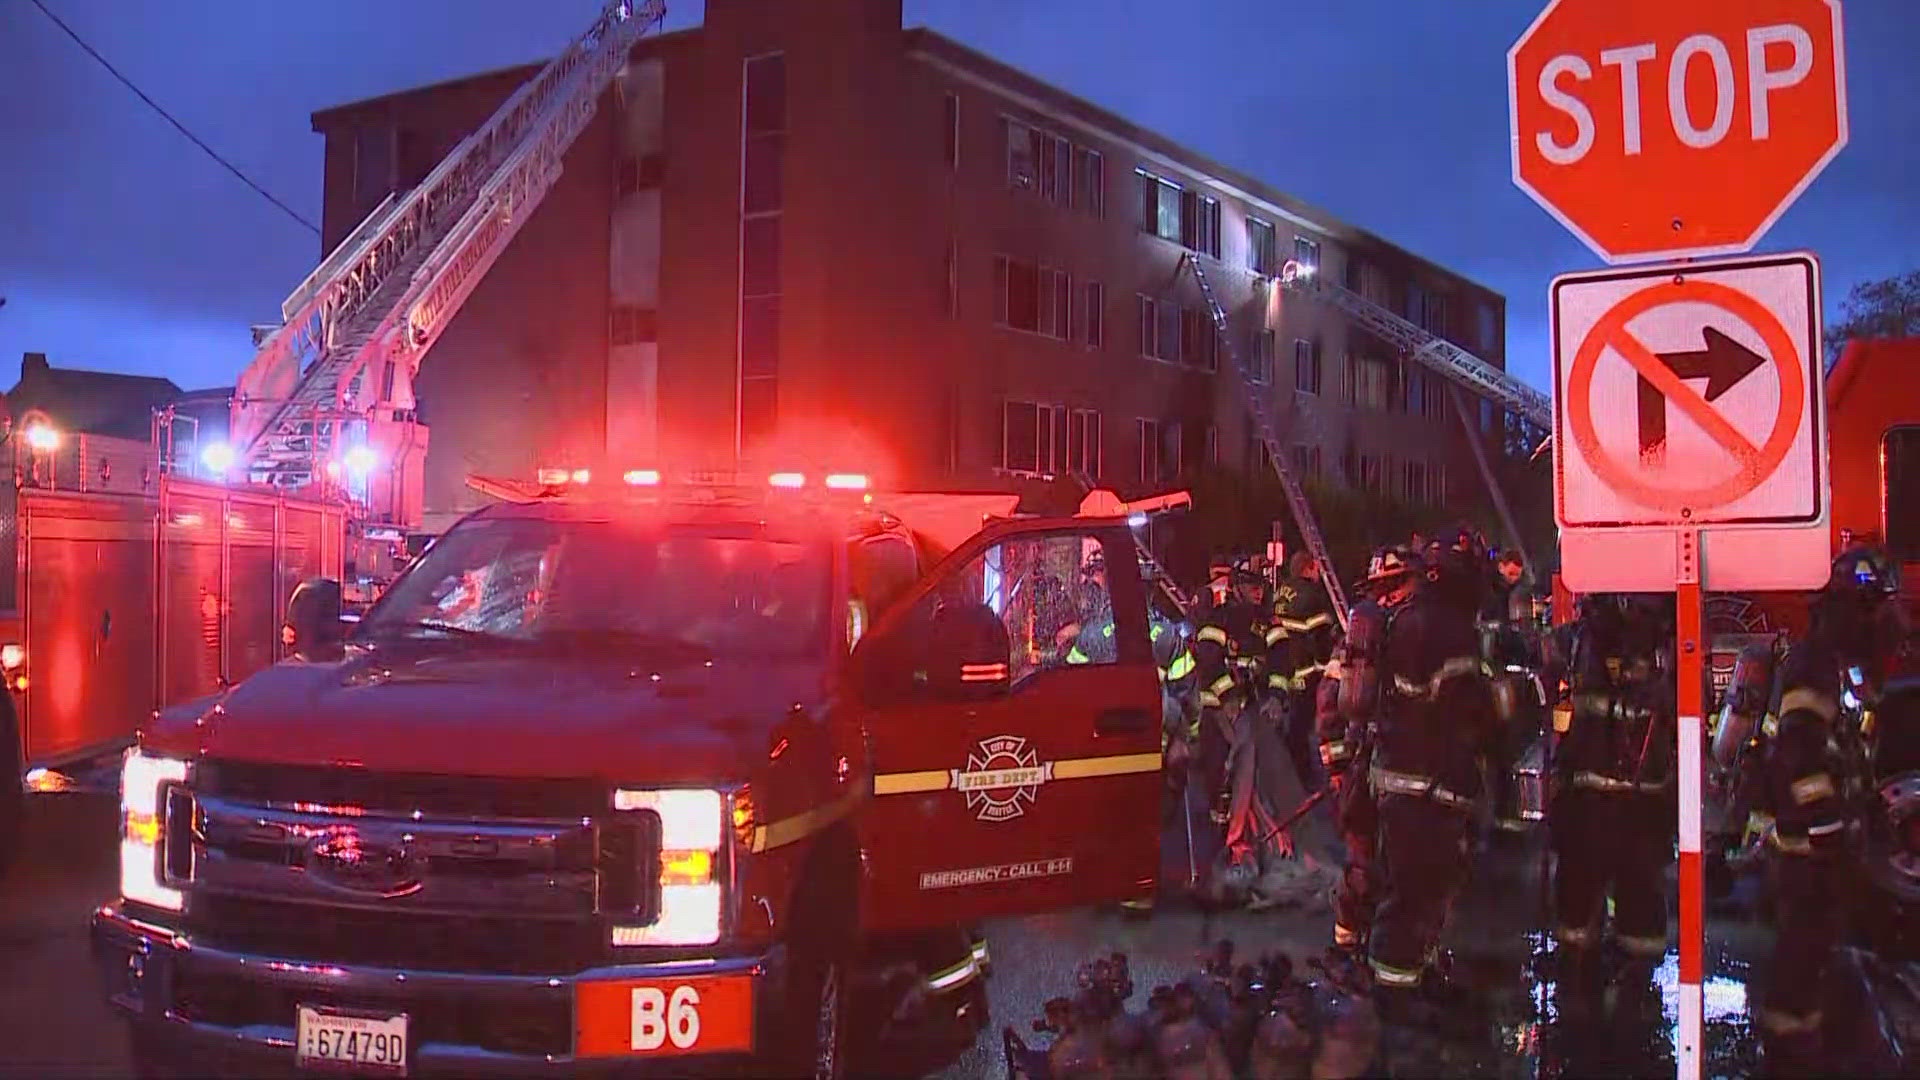 Four people were injured in a fire at the vacant Roosevelt Manor apartment building in Seattle's University District